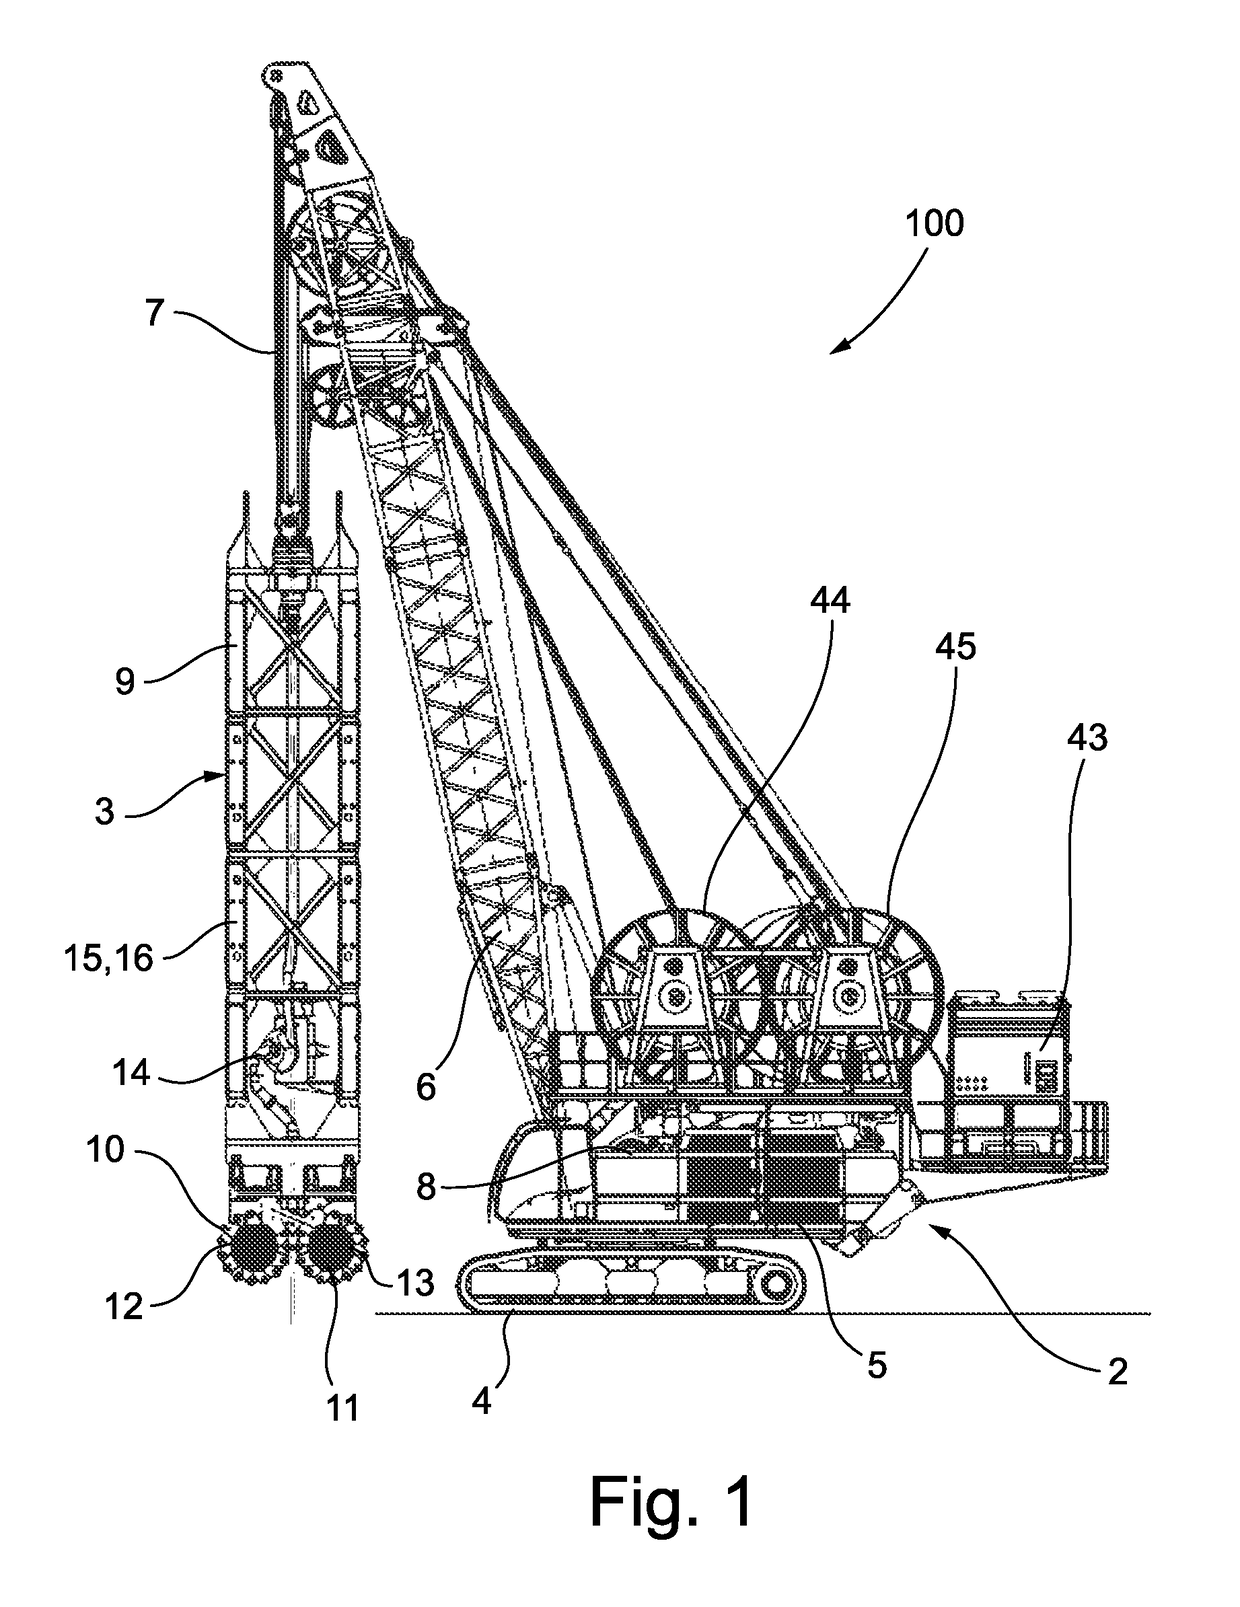 Digging equipment with relative improved hydraulic system